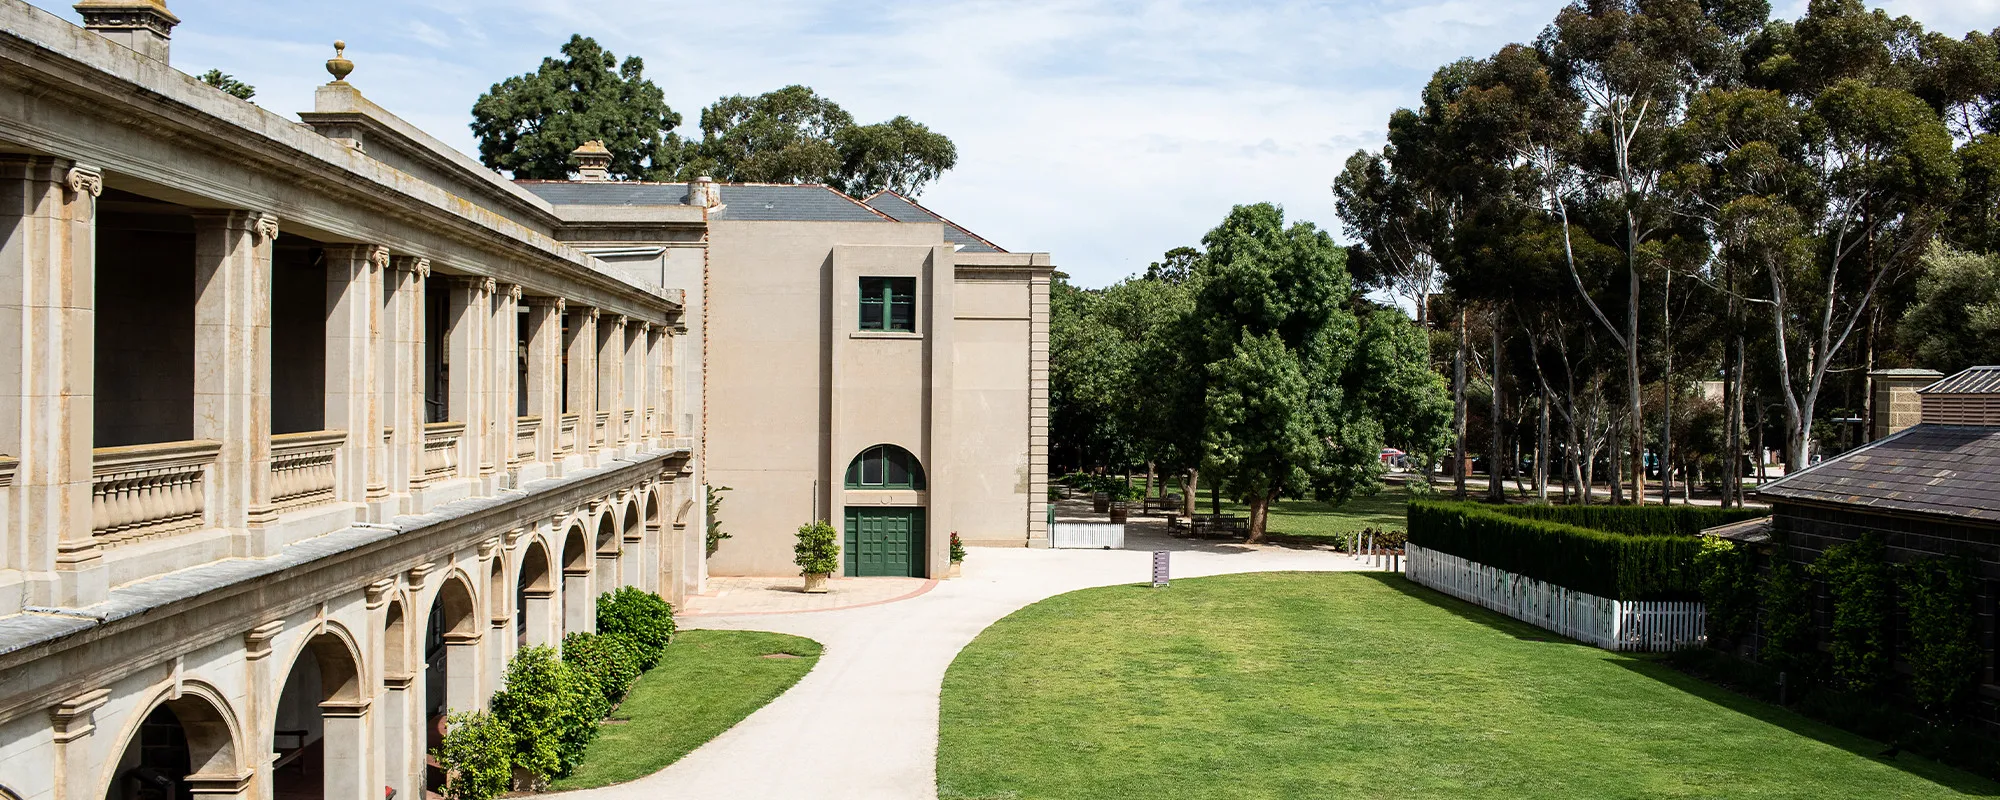 Lancemore Mansion Hotel Werribee Park Boutique Luxury Accommodation Facility grounds 2000 x 800 8